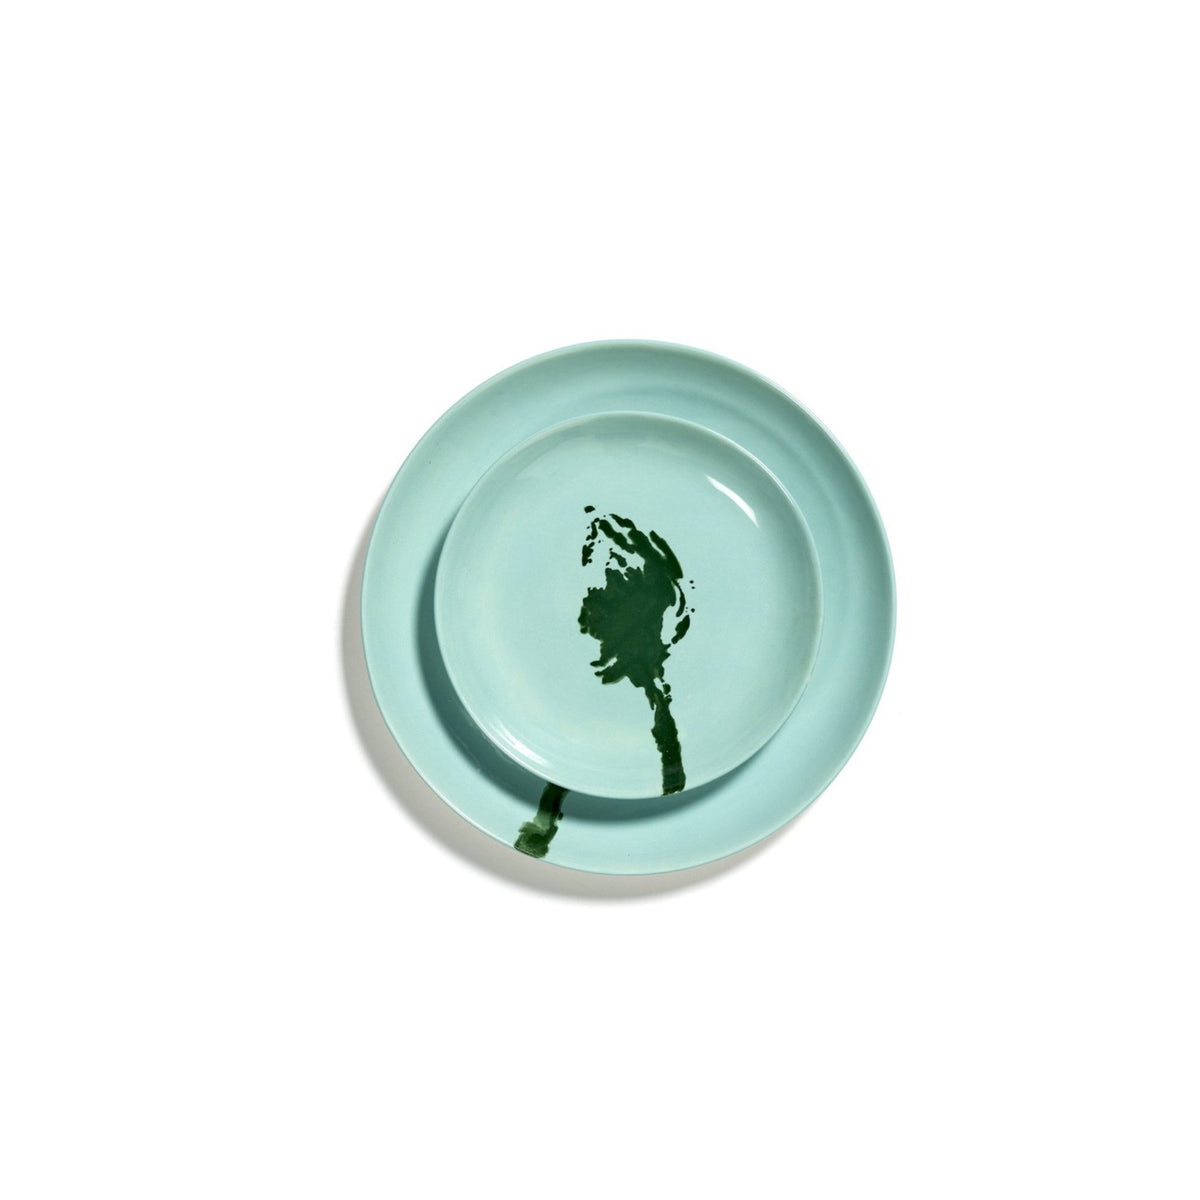 Ottolenghi for Serax Feast collection, extra small plate, with Azure Artichoke Green design.